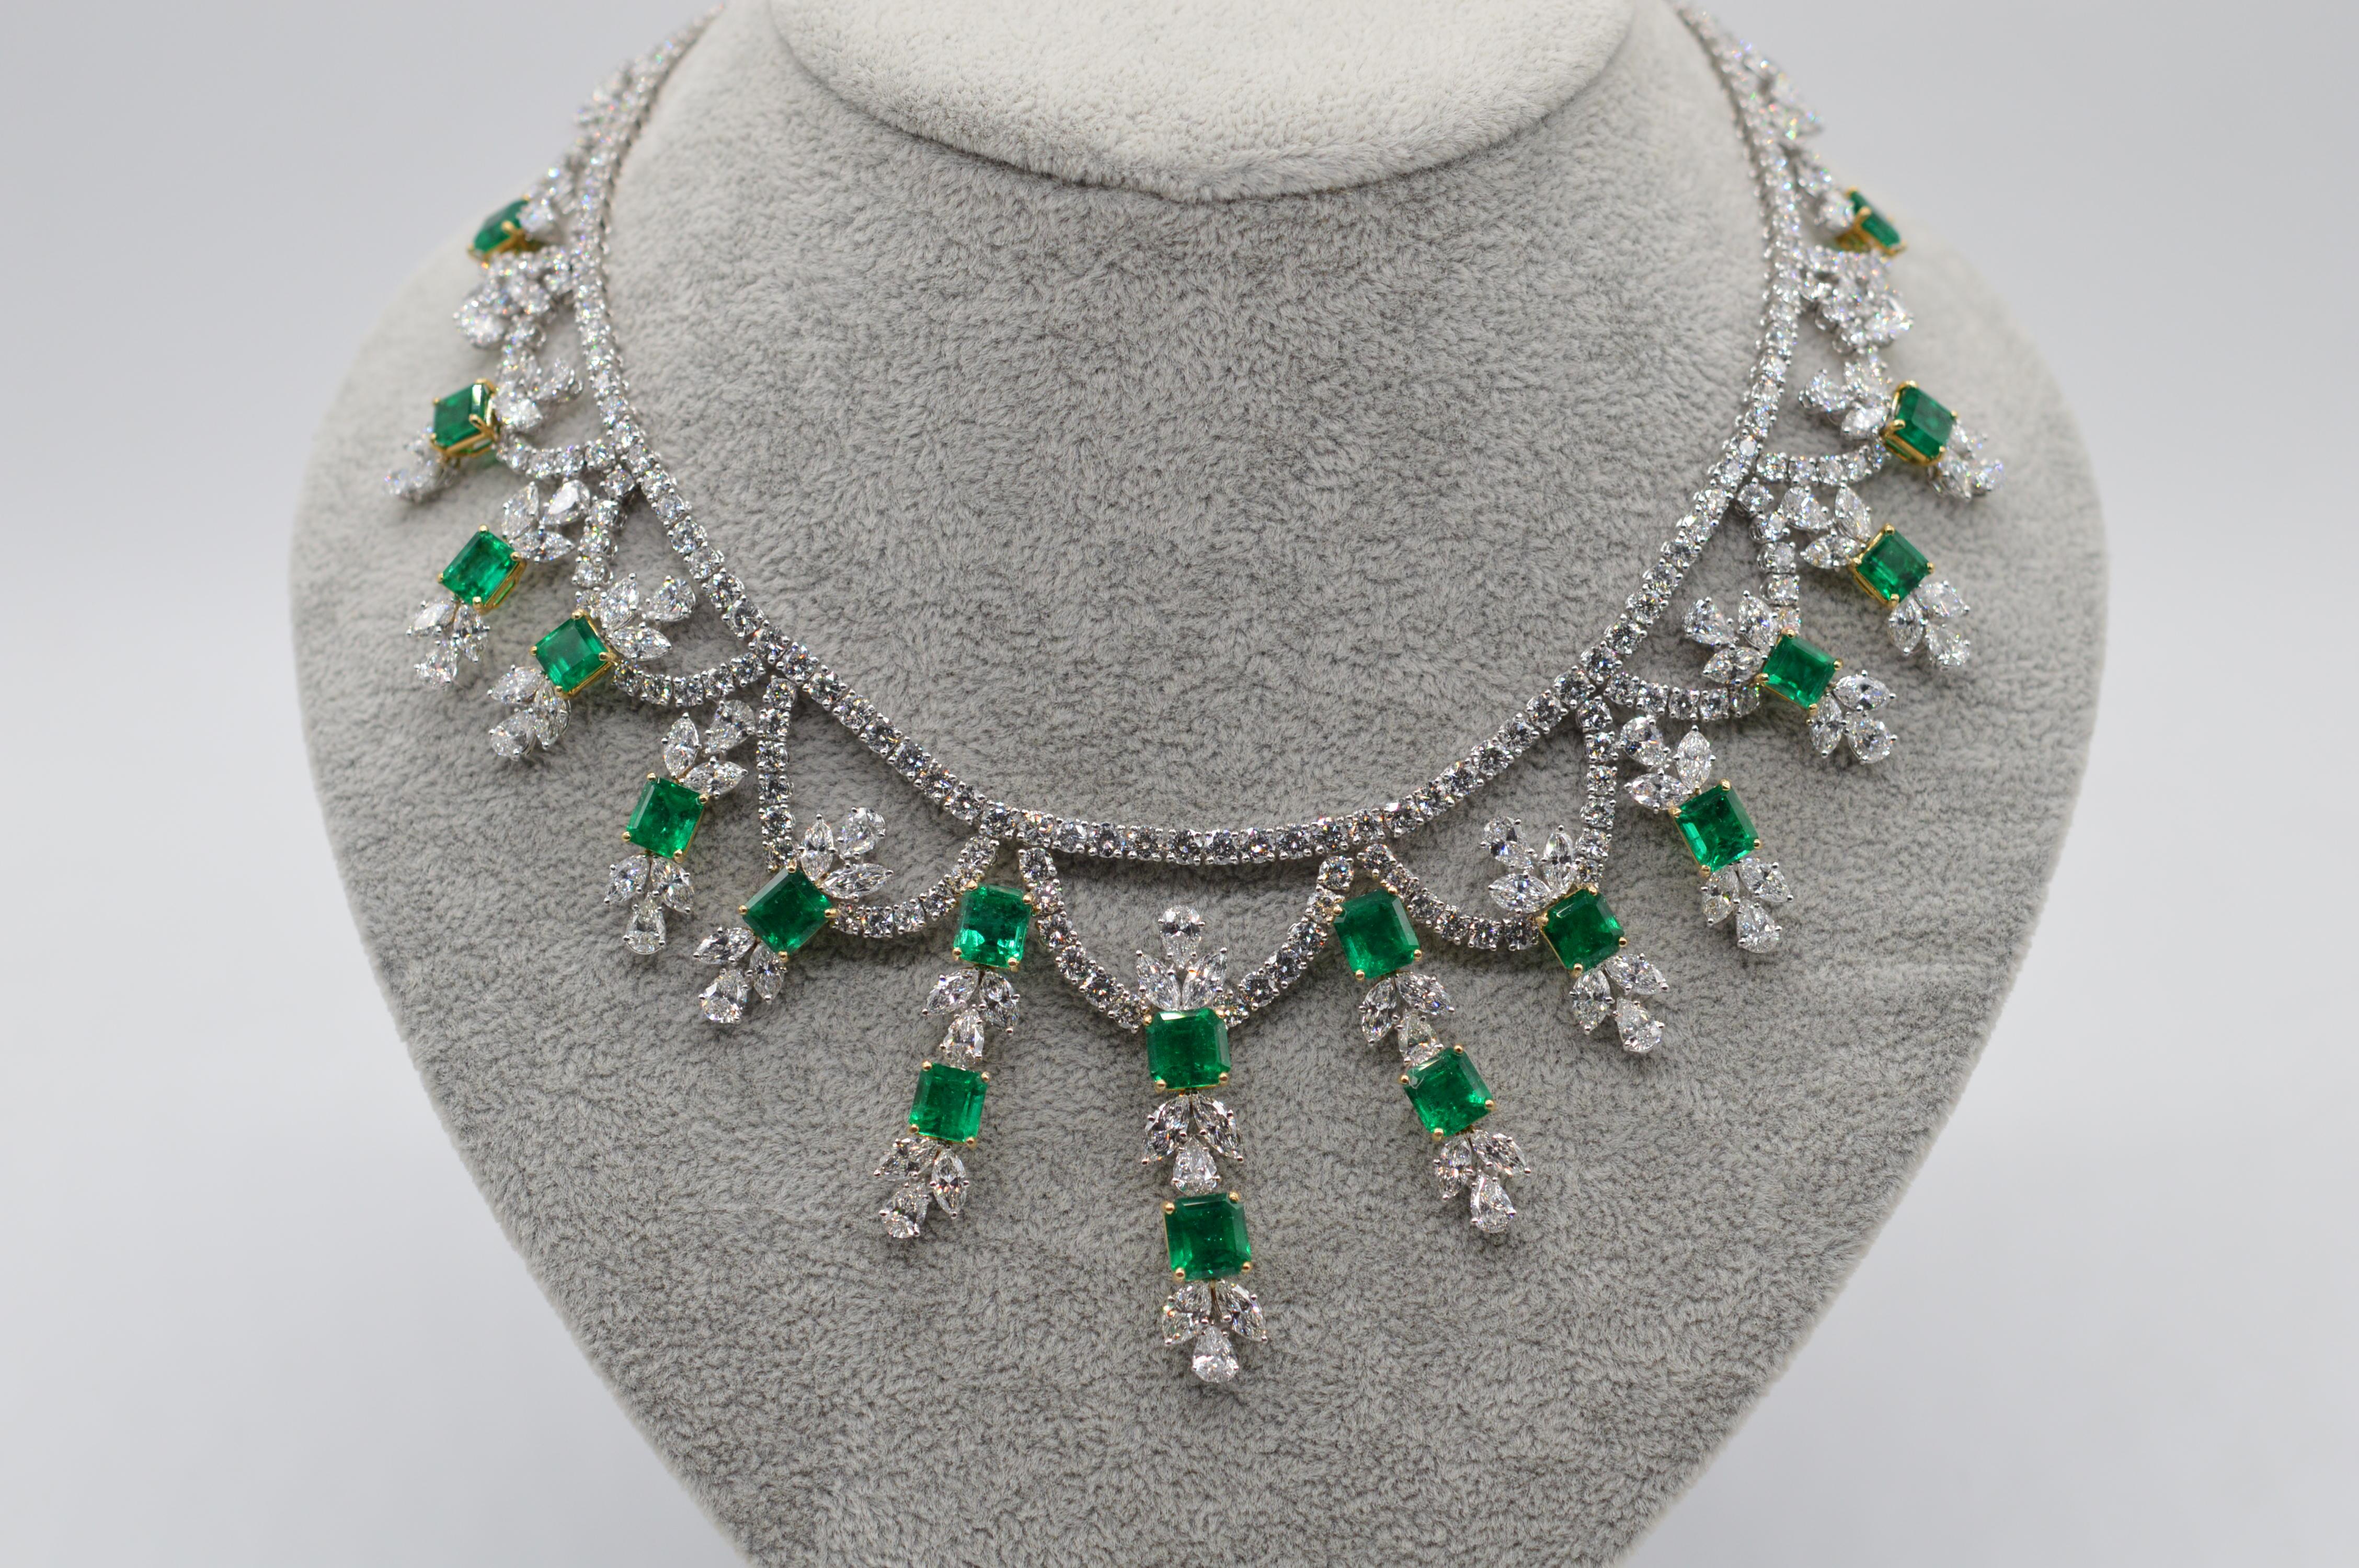 Magnificent Emerald-Cut Colombian Emeralds & Diamonds Set Unworn
Mounted in an 18K Yellow & White Gold Necklace, Earrings, Ring & Bracelet
The Emeralds are of Colombians origin
Each item is delicately accented by numerous colorless white